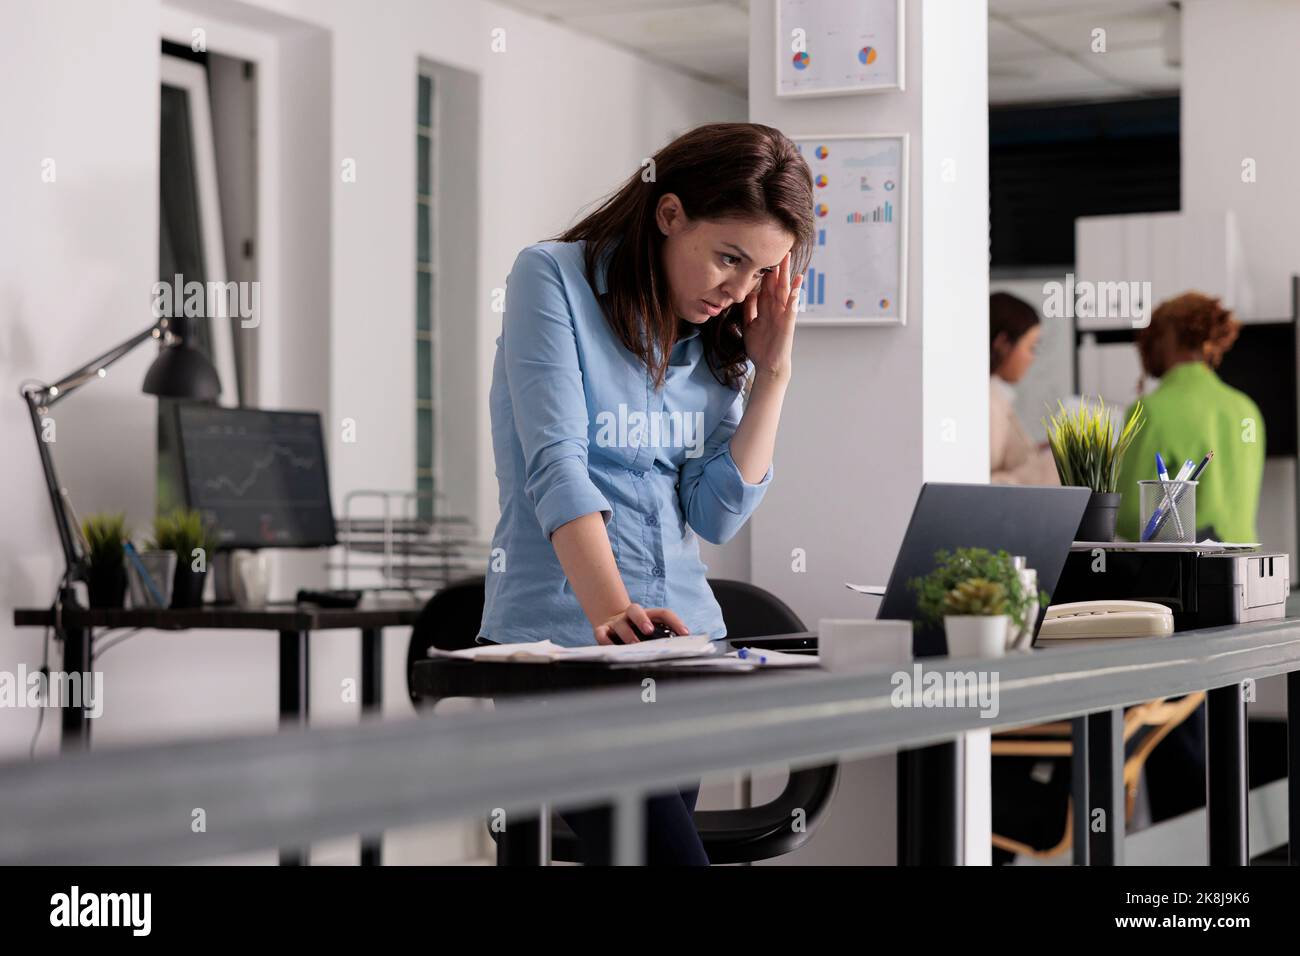 Sad employee having headache, busy manager tired from work, exhausted woman in coworking space. Office worker suffering from migraine symptom, frustrated person feeling unwell, touching temples Stock Photo